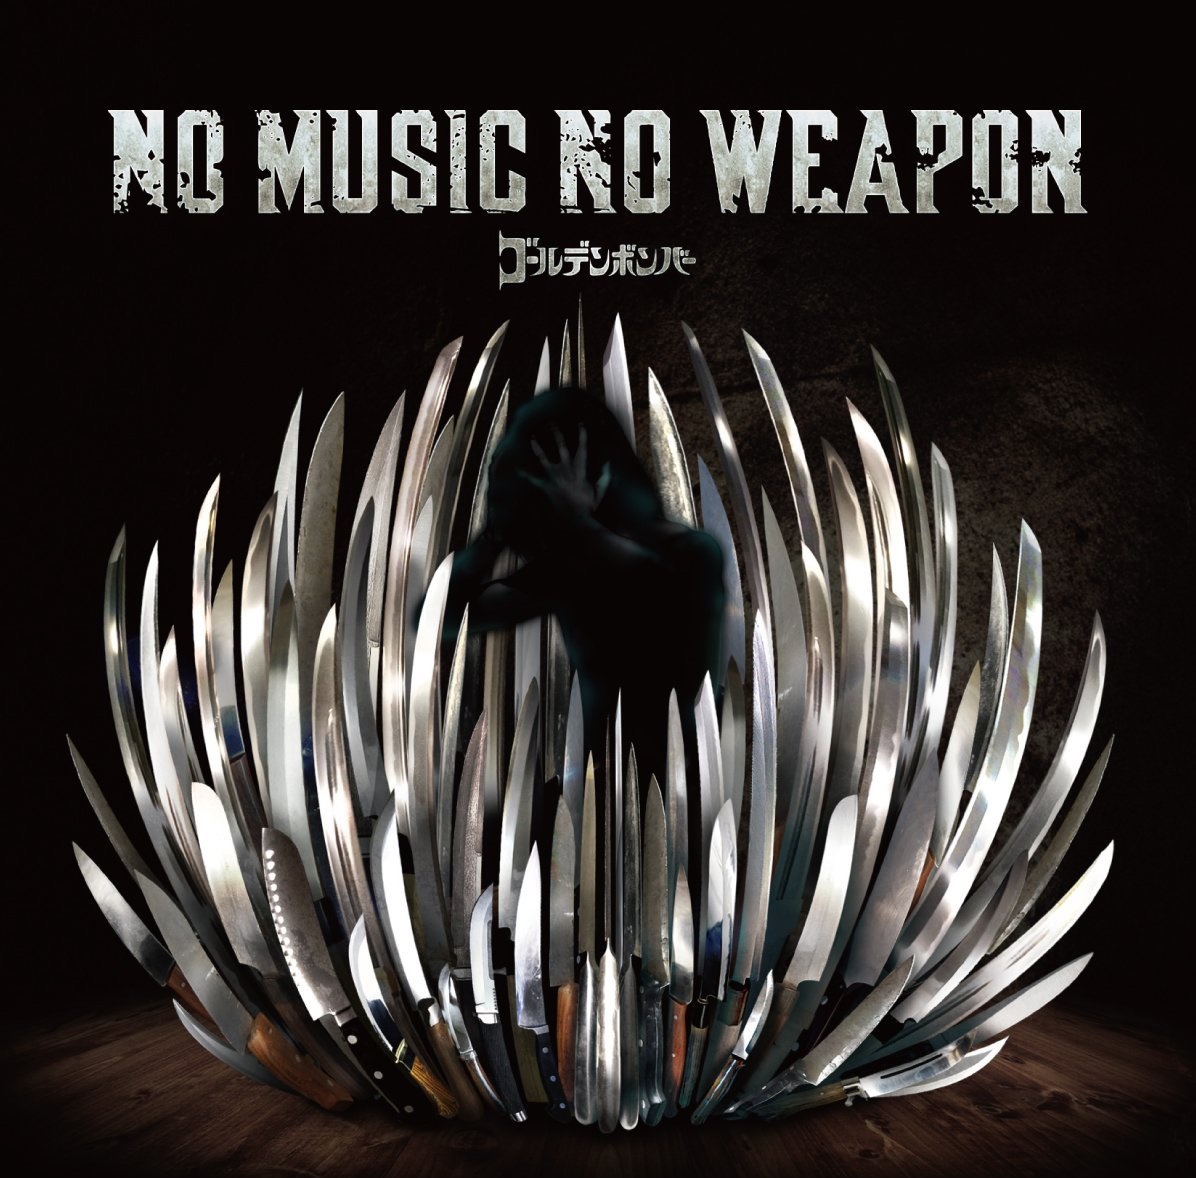 Golden Bomber – No Music, No Weapon